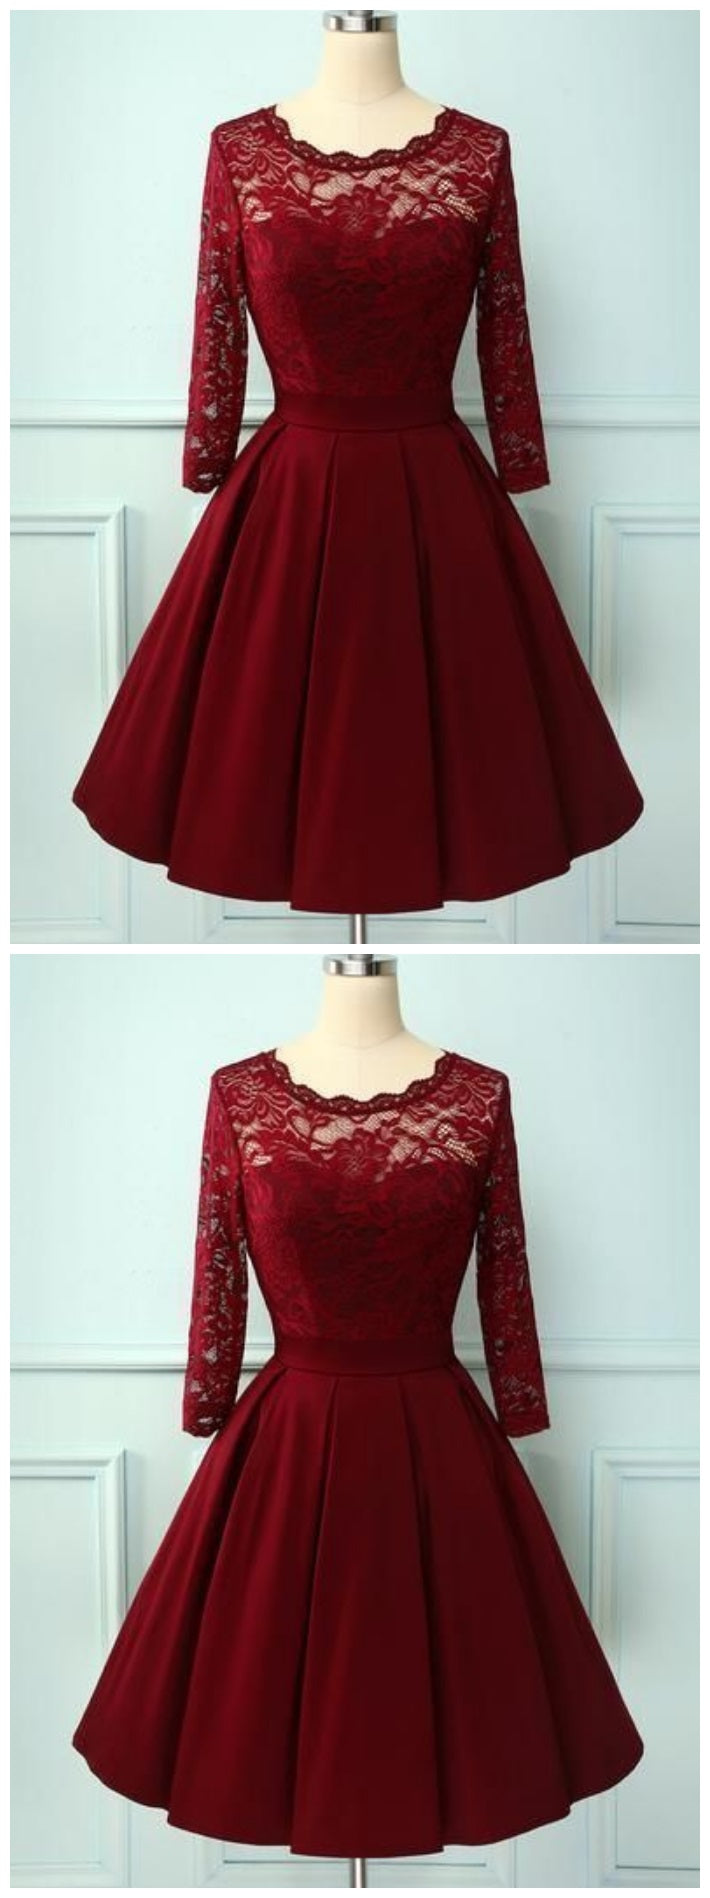 1950s Burgundy Lace Short Prom Dress with Sleeves,21121308 - DollyGown